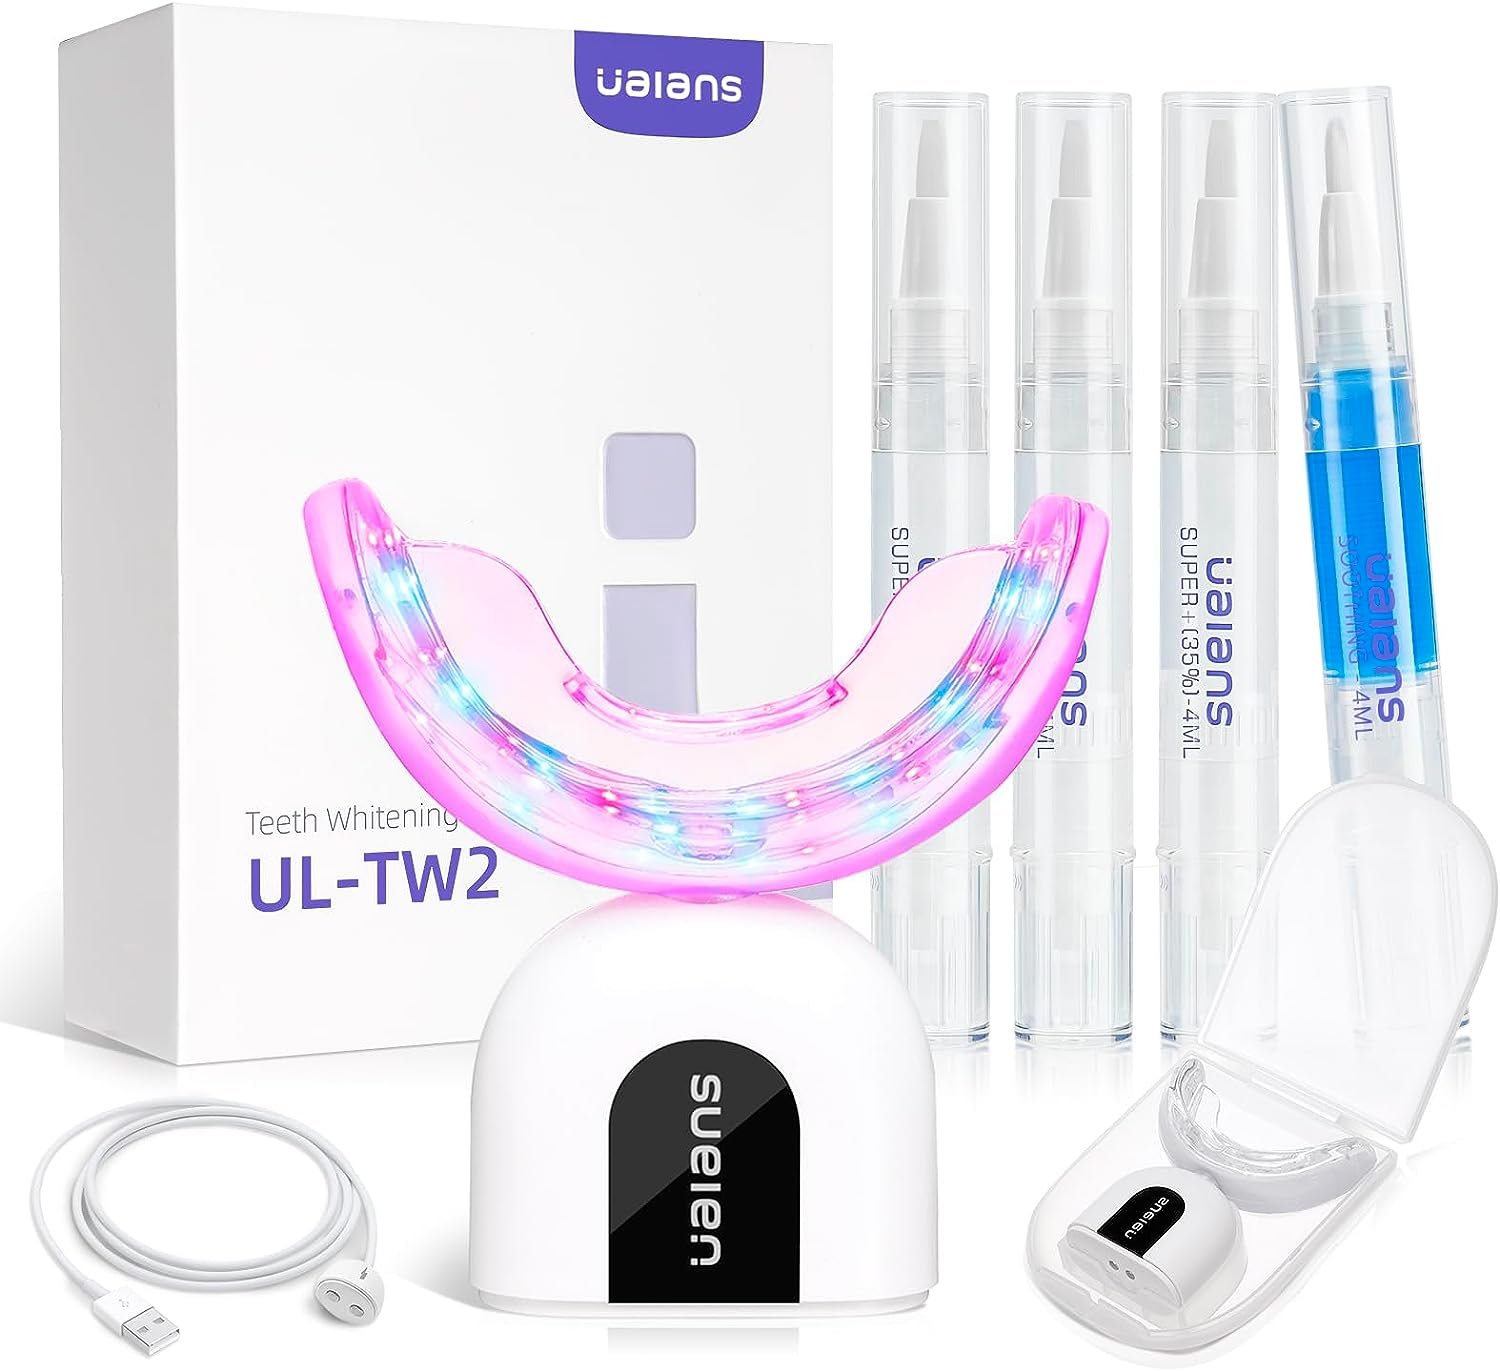 Teeth Whitening Kit, Ualans Teeth Whitener with 32X LED Blue Red Light, 35% Carbamide Peroxide Teeth Whitening Pen, Soothing Gel, Enamel Safe, IPX6 Waterproof, Professional 10 Mins Tooth Whitening